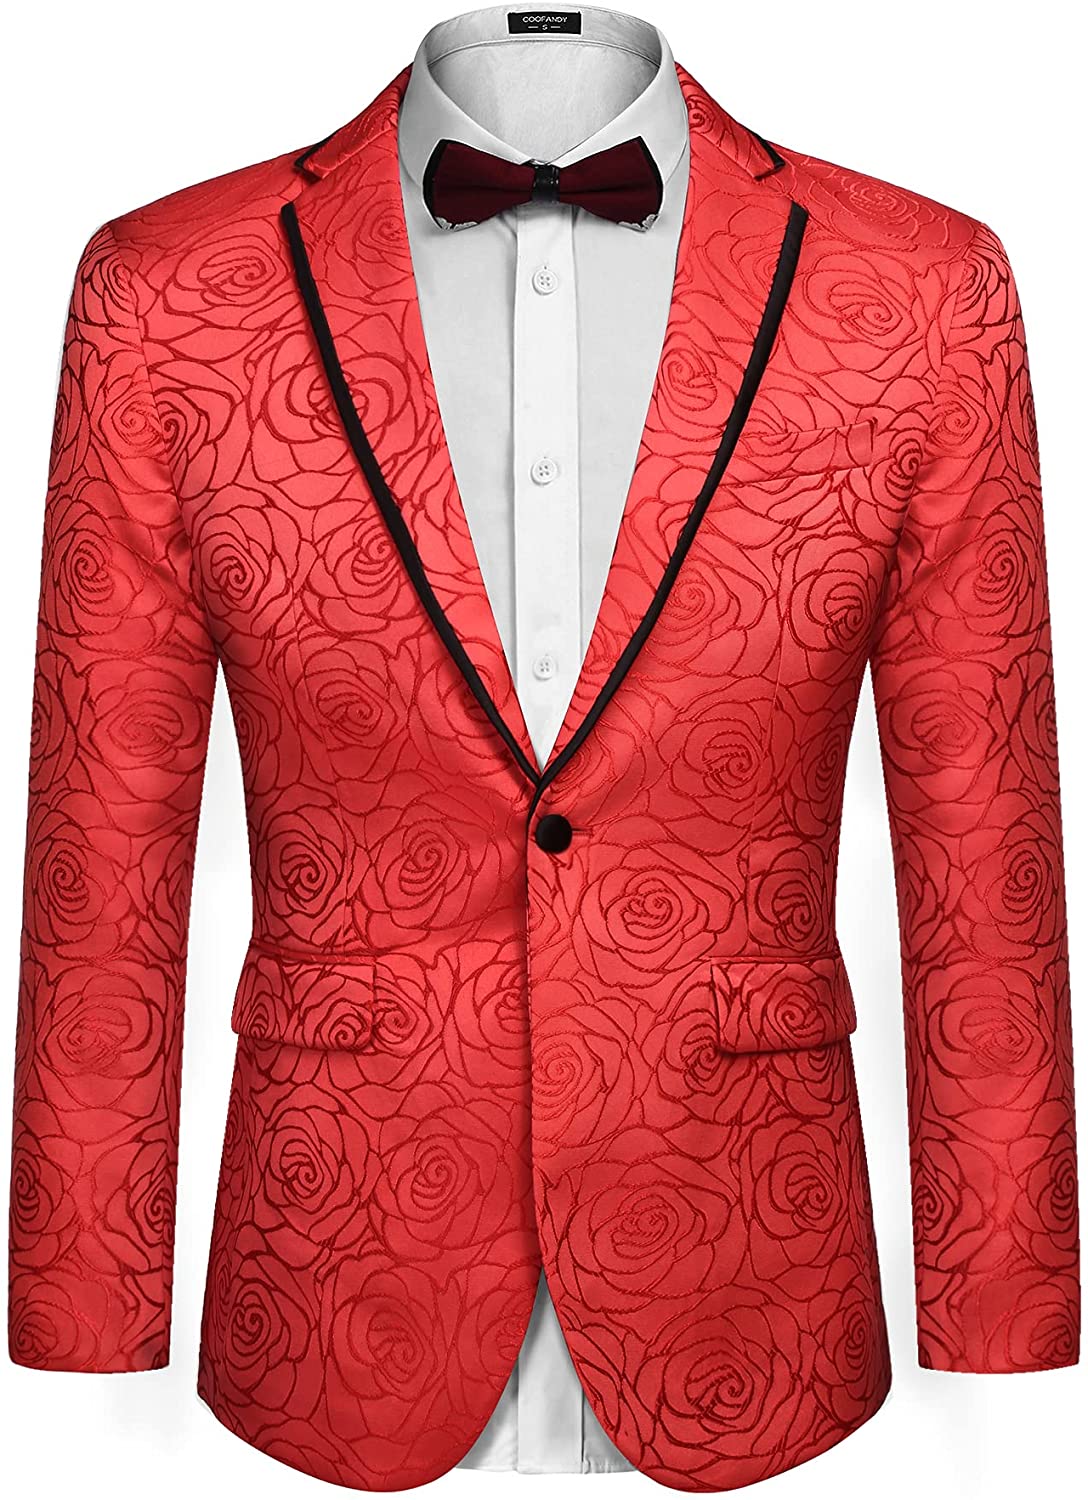 HAOLEI Mens Floral Tuxedo Jacket UK Sale Clearance Dinner Prom Wedding  Blazer Suits Button Down Chinese Collar Grandad Suit Jackets Slim Fit  Casual